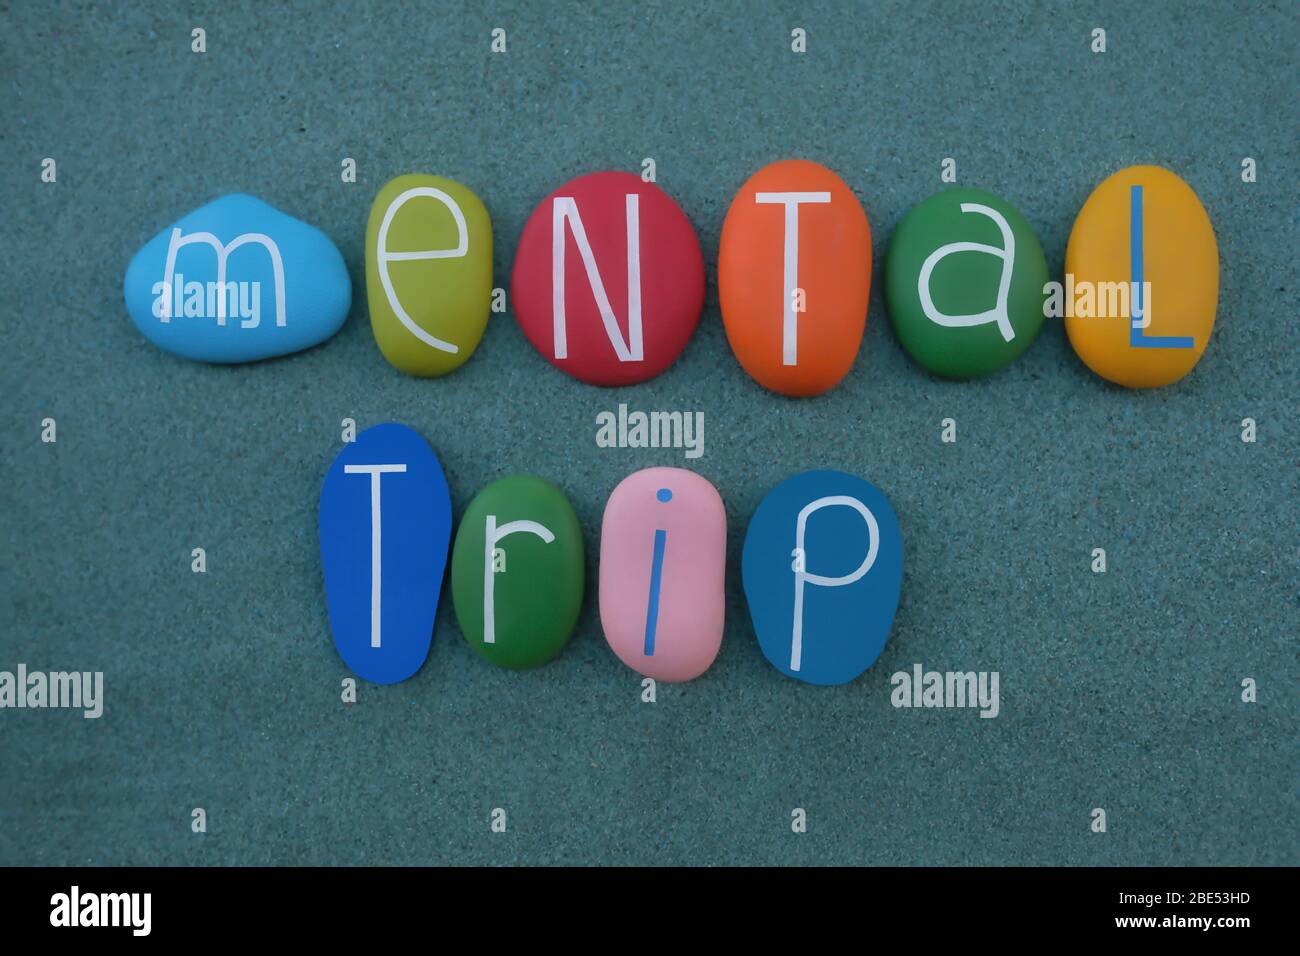 Mental trip text composed with multi colored stone letters over green sand Stock Photo